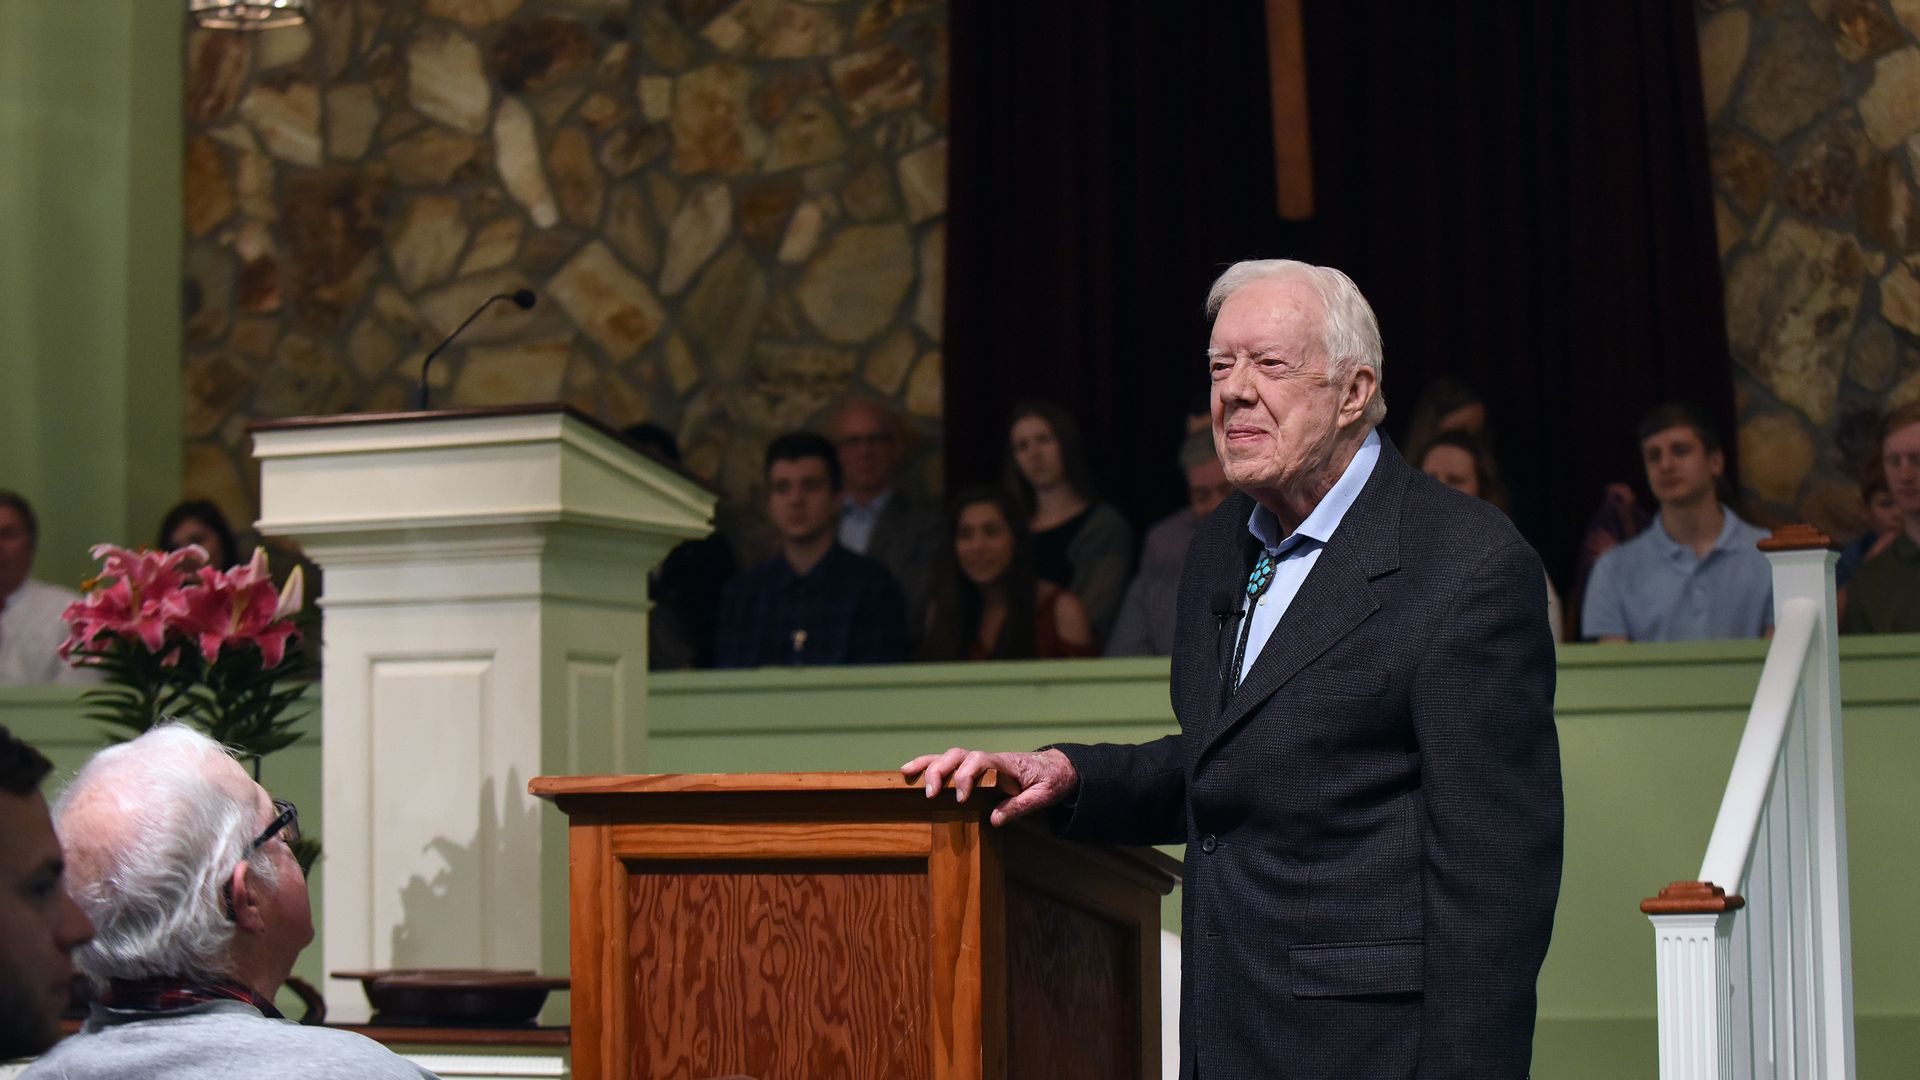 Jimmy Carter stands in front of a podium inside a church 